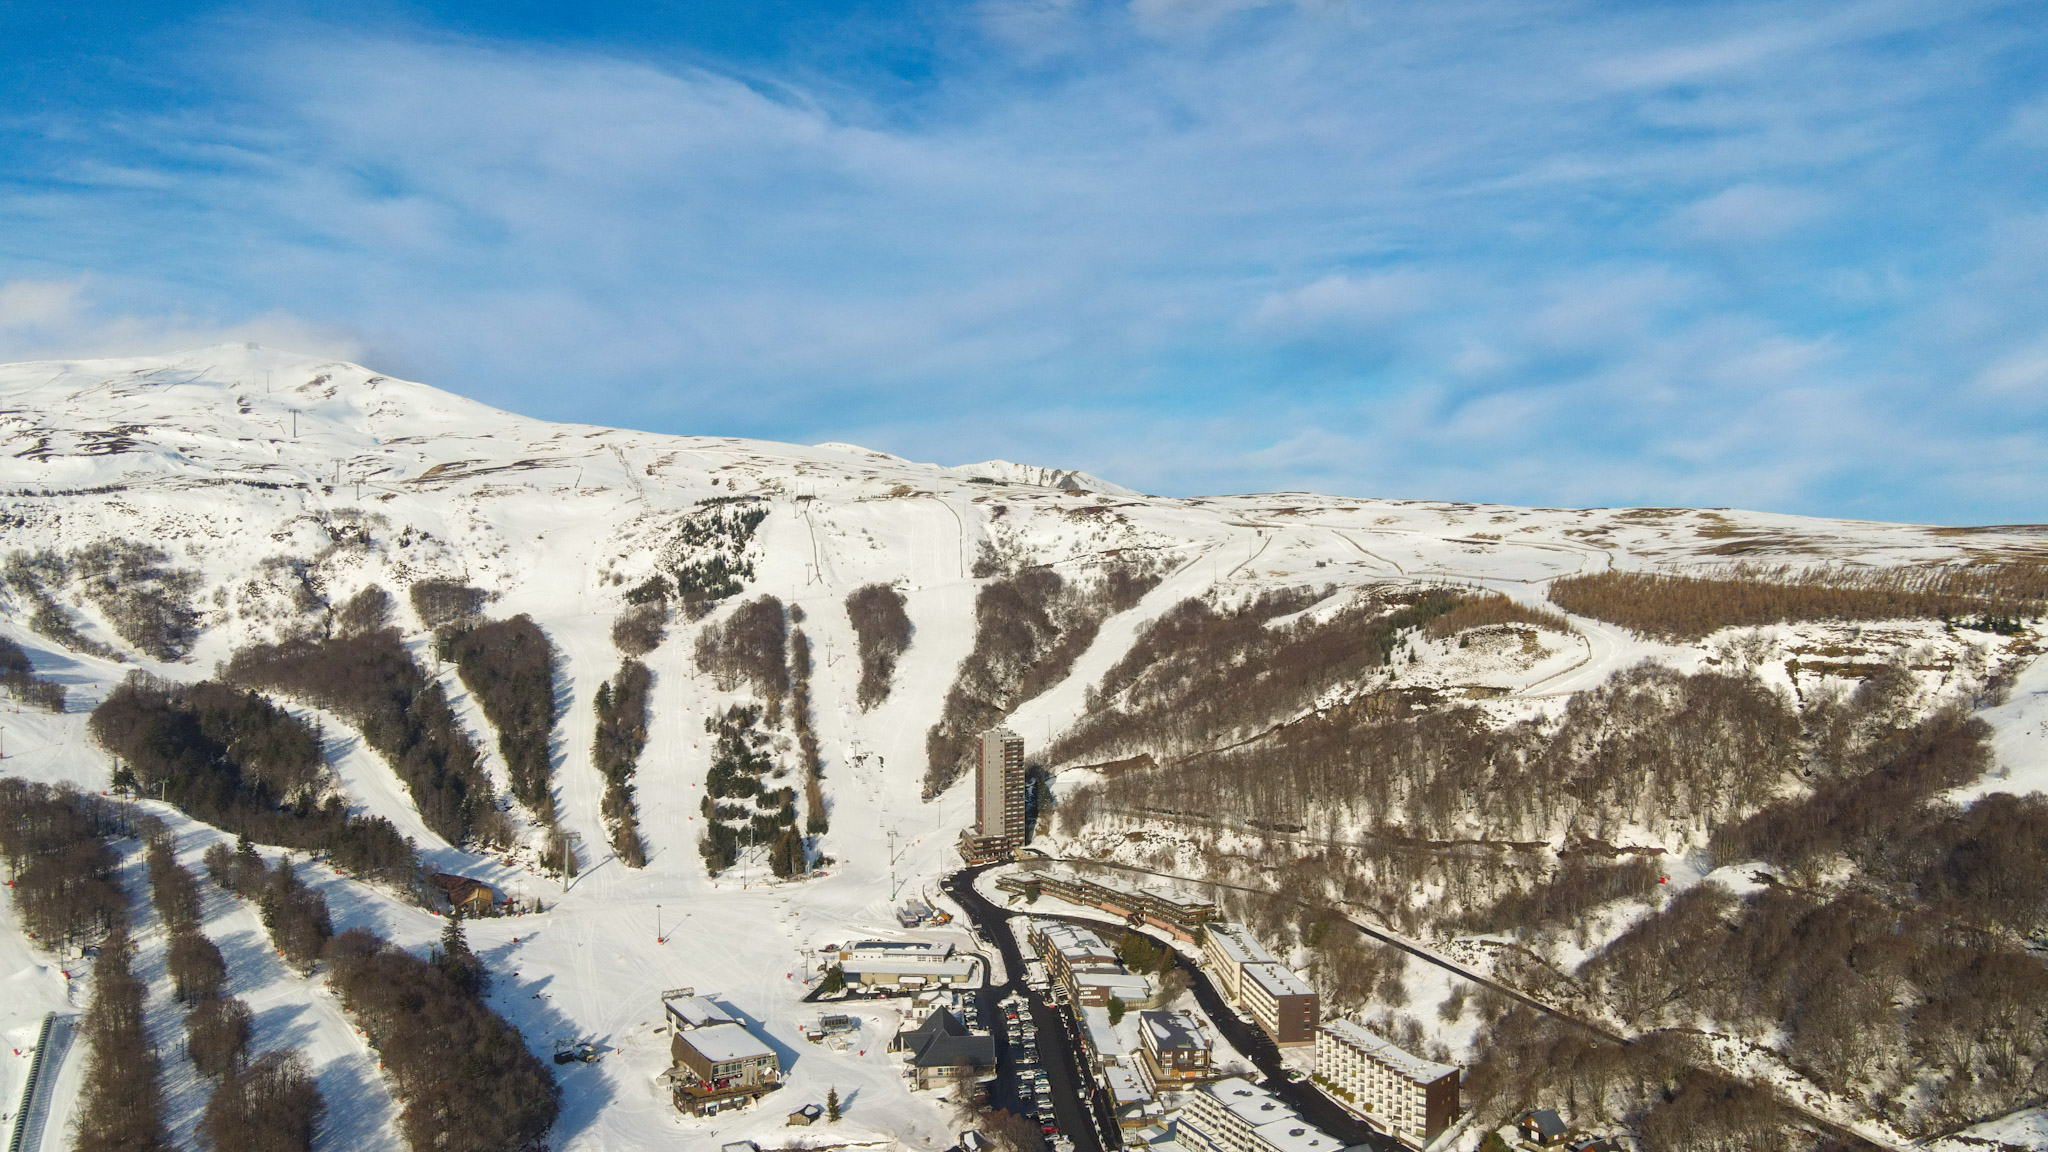 Super Besse seen from the sky, the Perdrix cable car and the town center of Super Besse